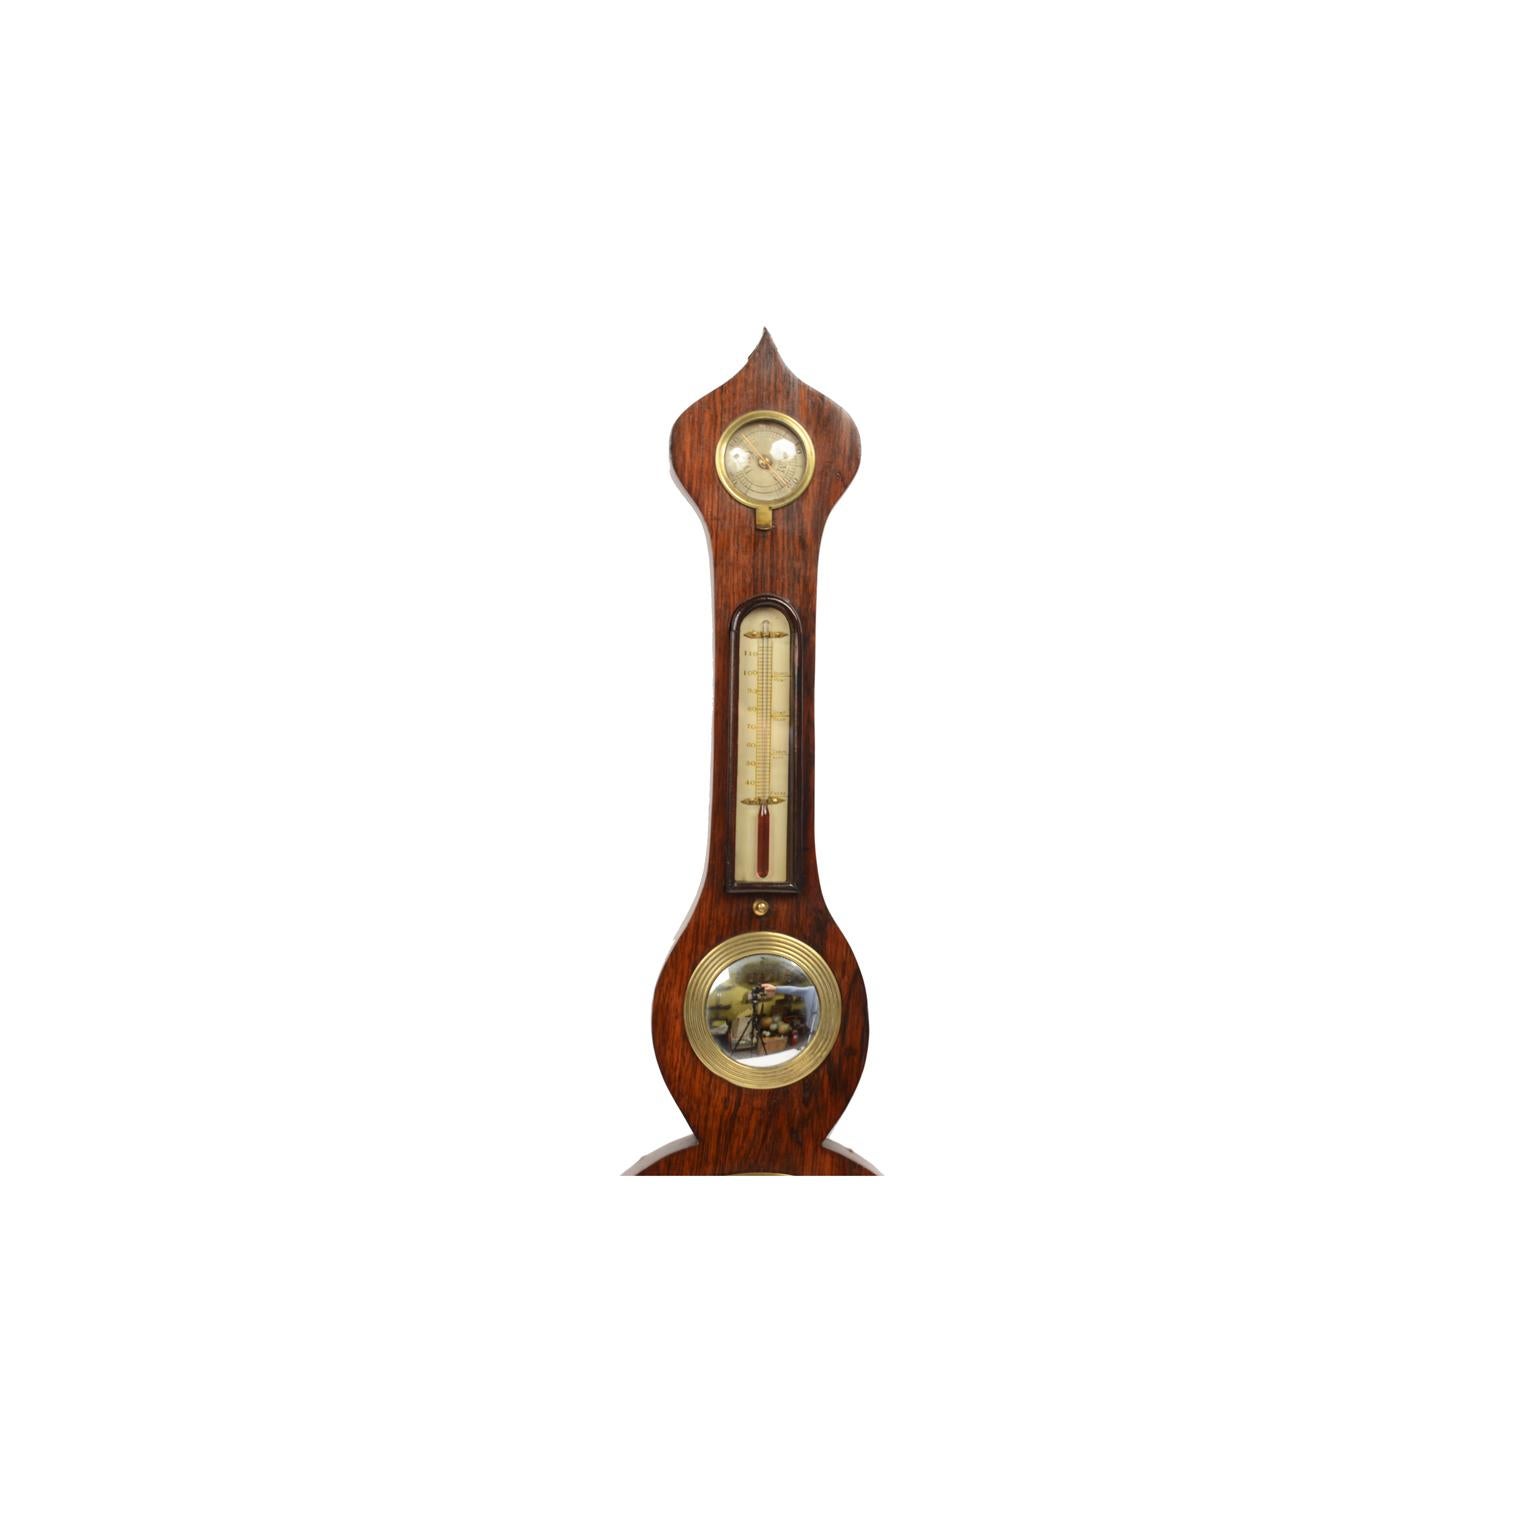 Torricellian barometer made of mahogany wood, complete with reading vernier for checking pressure variation, alcohol thermometer, hygrometer and level for correct positioning of the instrument on the wall. English manufacture of the mid-19th